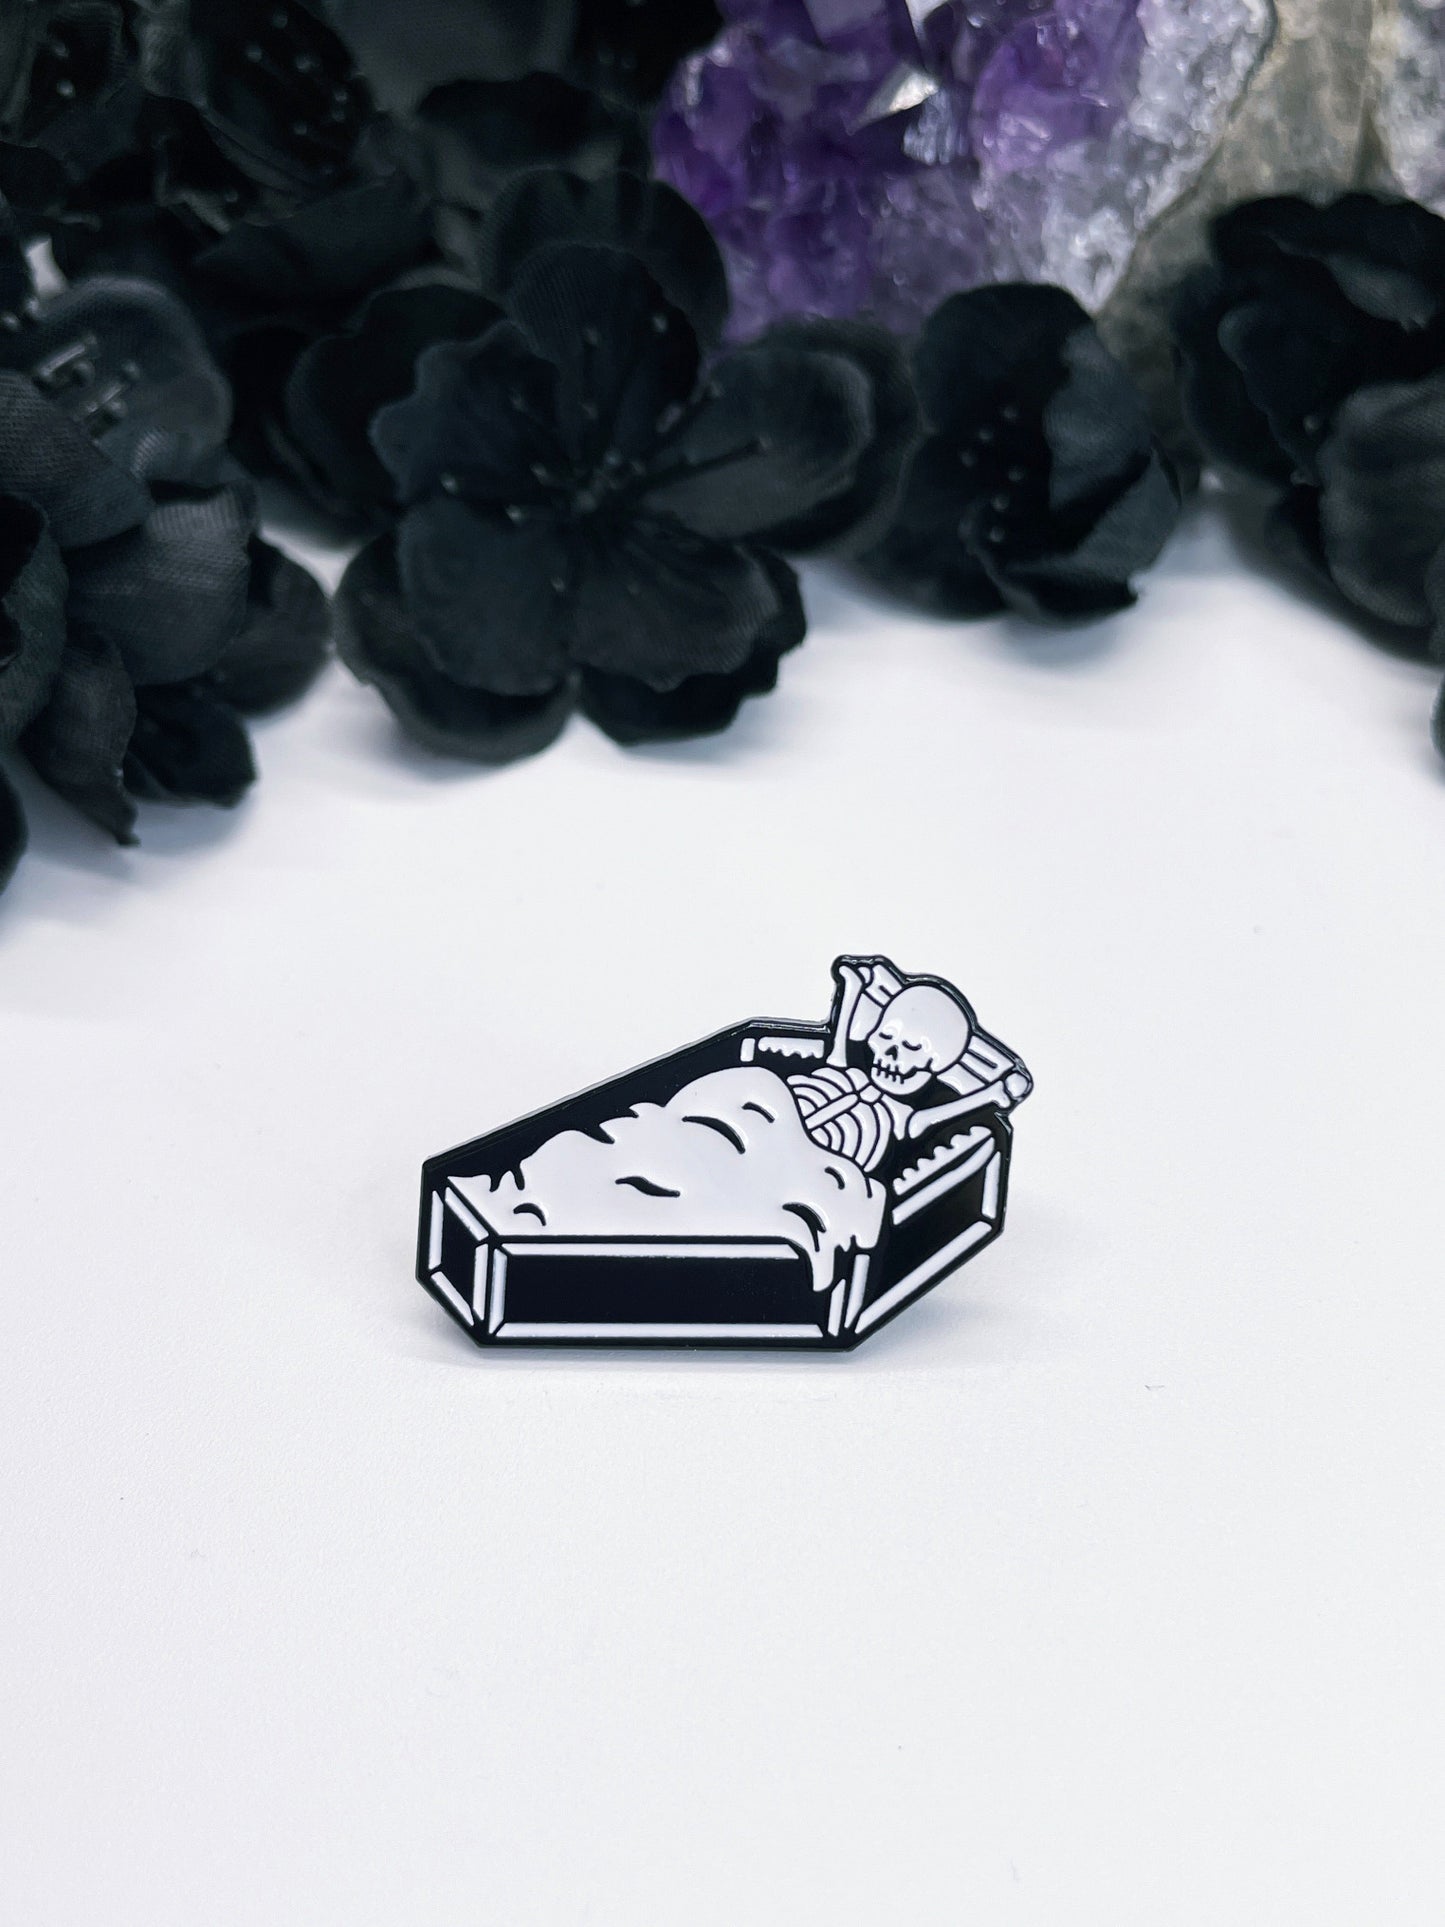 Pictured is an enamel pin of a skeleton sleeping inside a coffin.